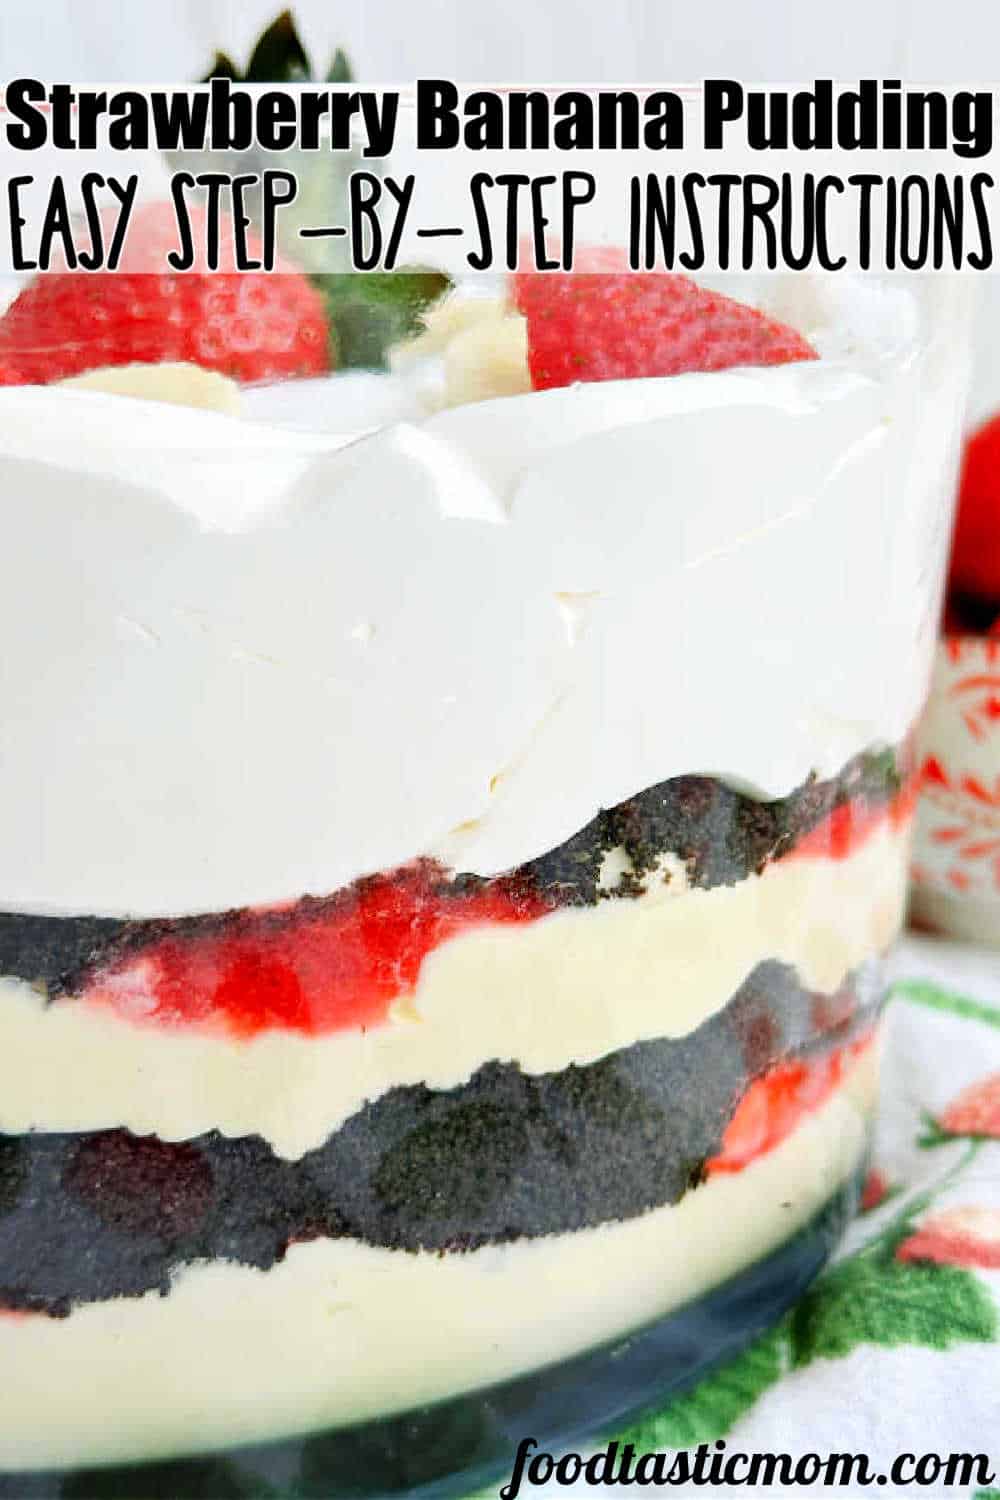 pin 3 for pinterest for strawberry banana pudding via @foodtasticmom